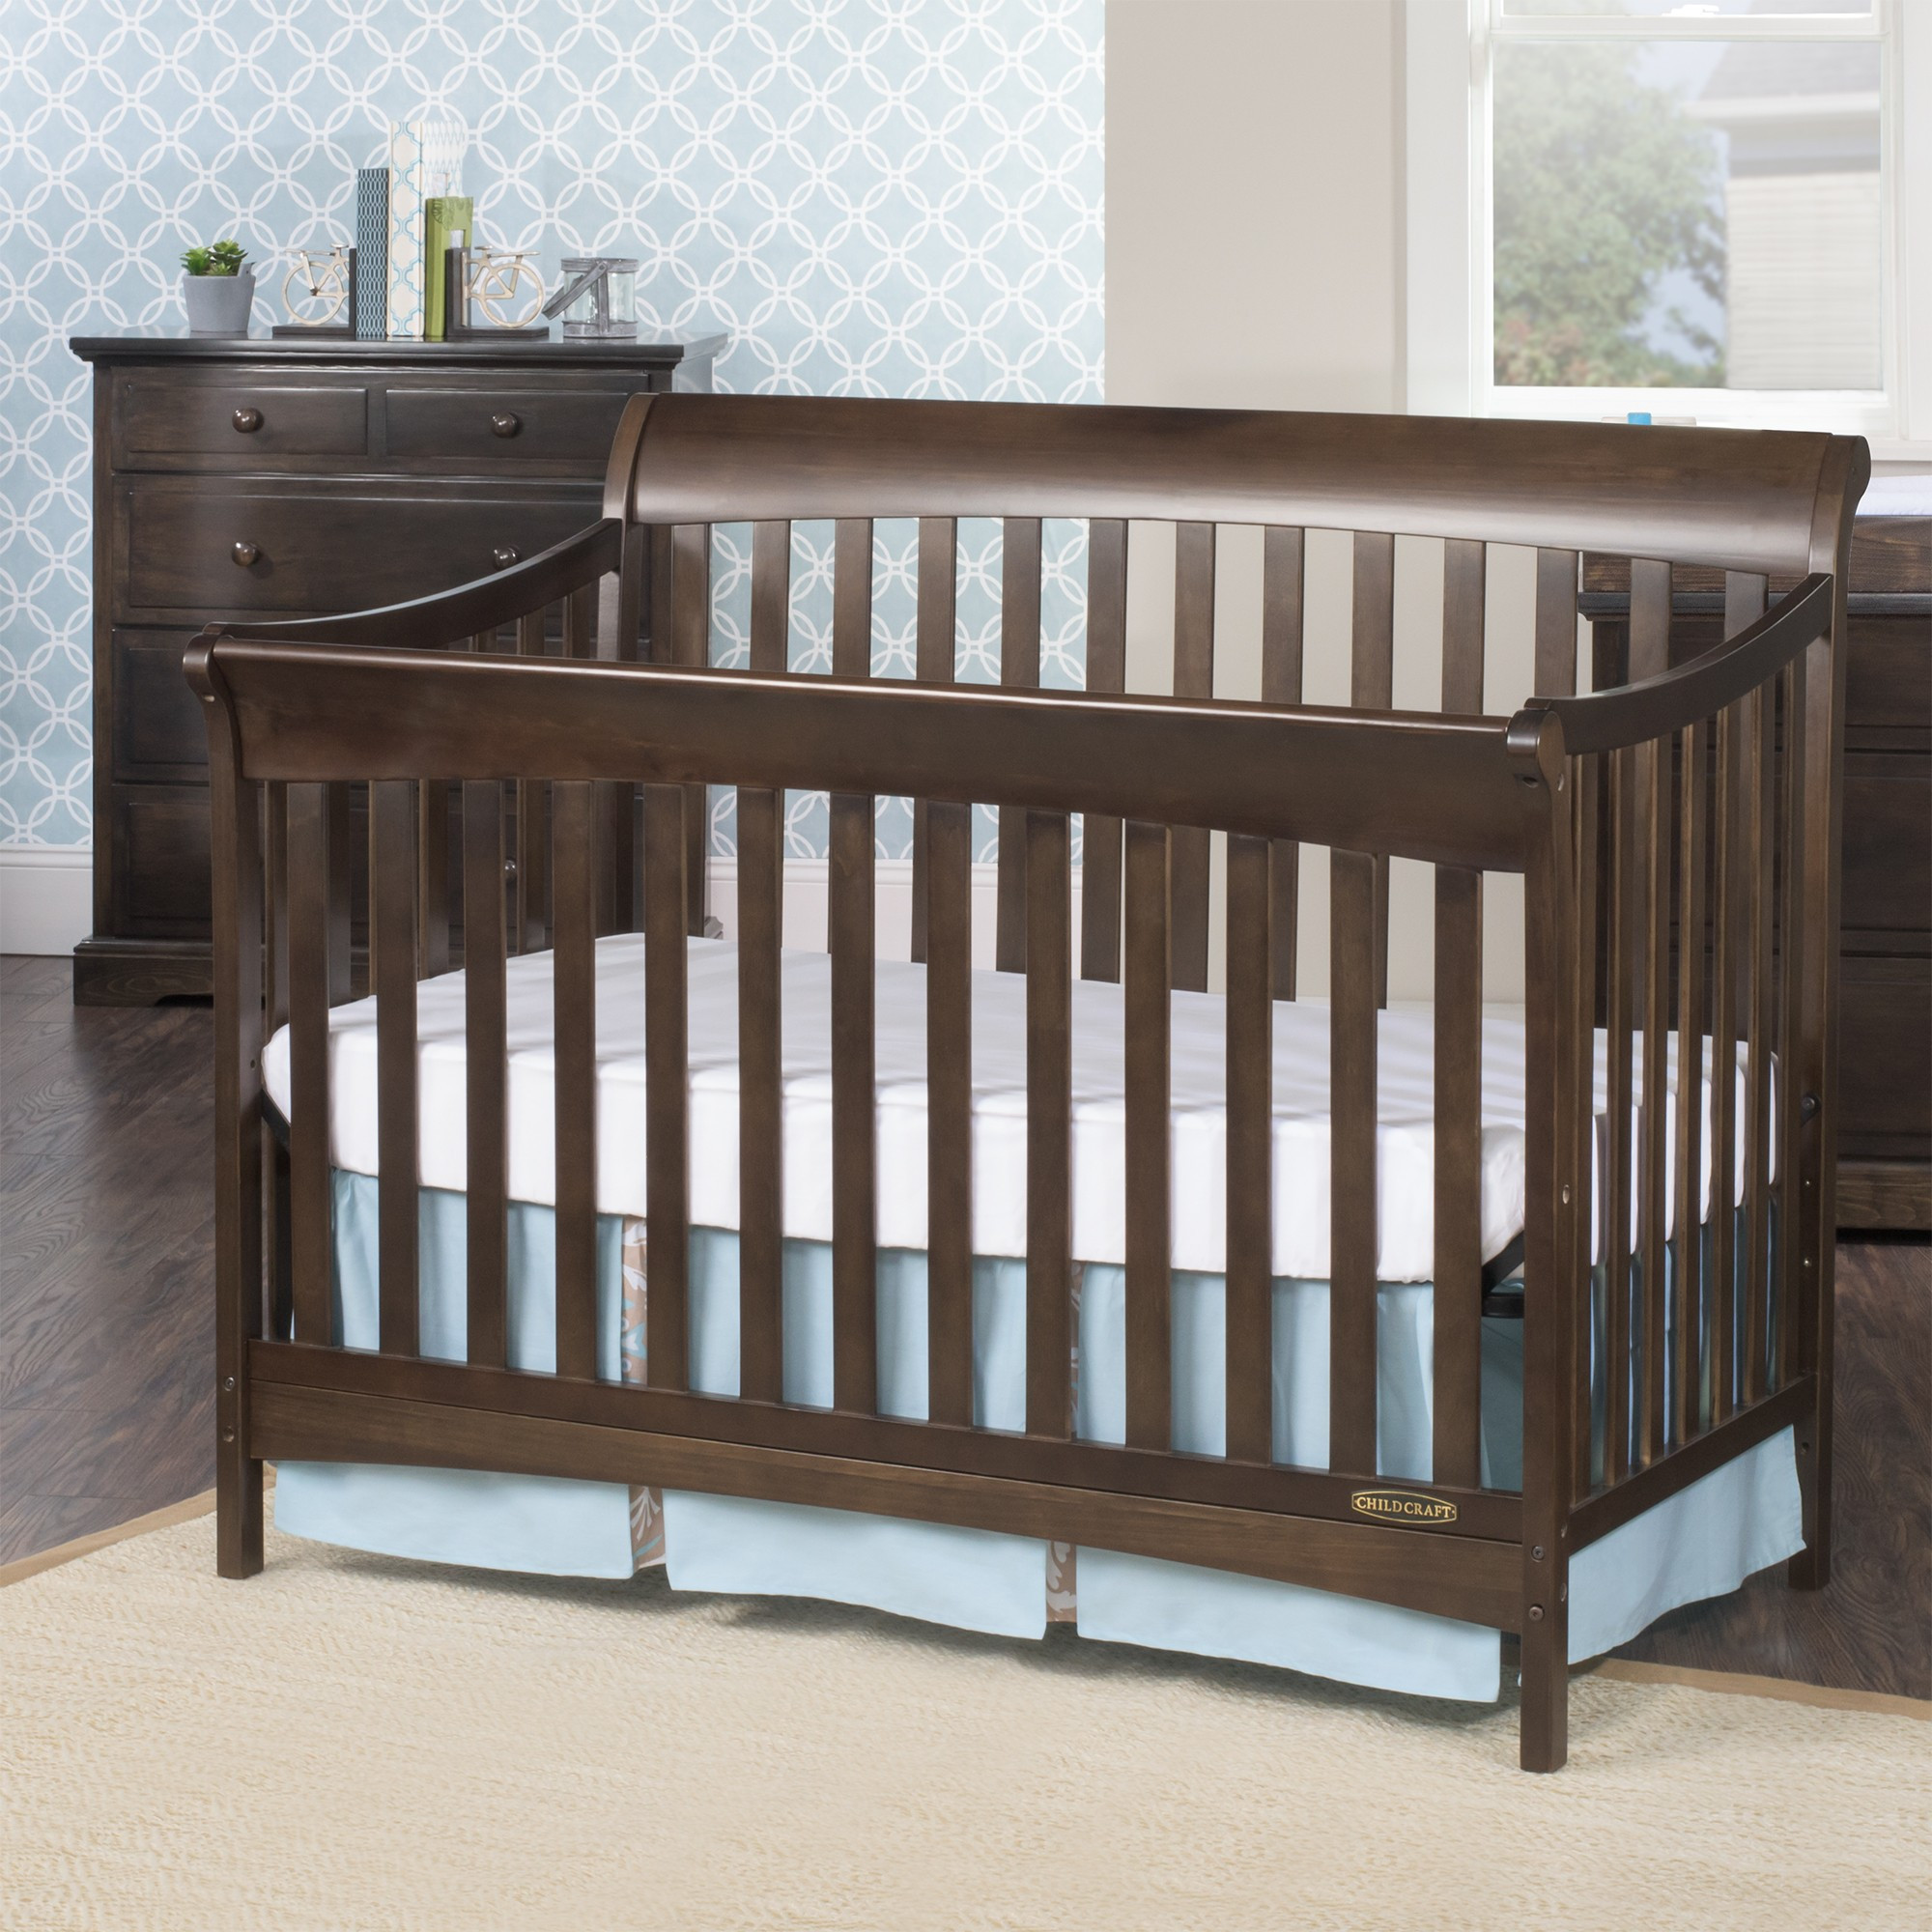 Child Craft Coventry Crib
 Coventry Full Size 4 in 1 Convertible Child Craft Crib